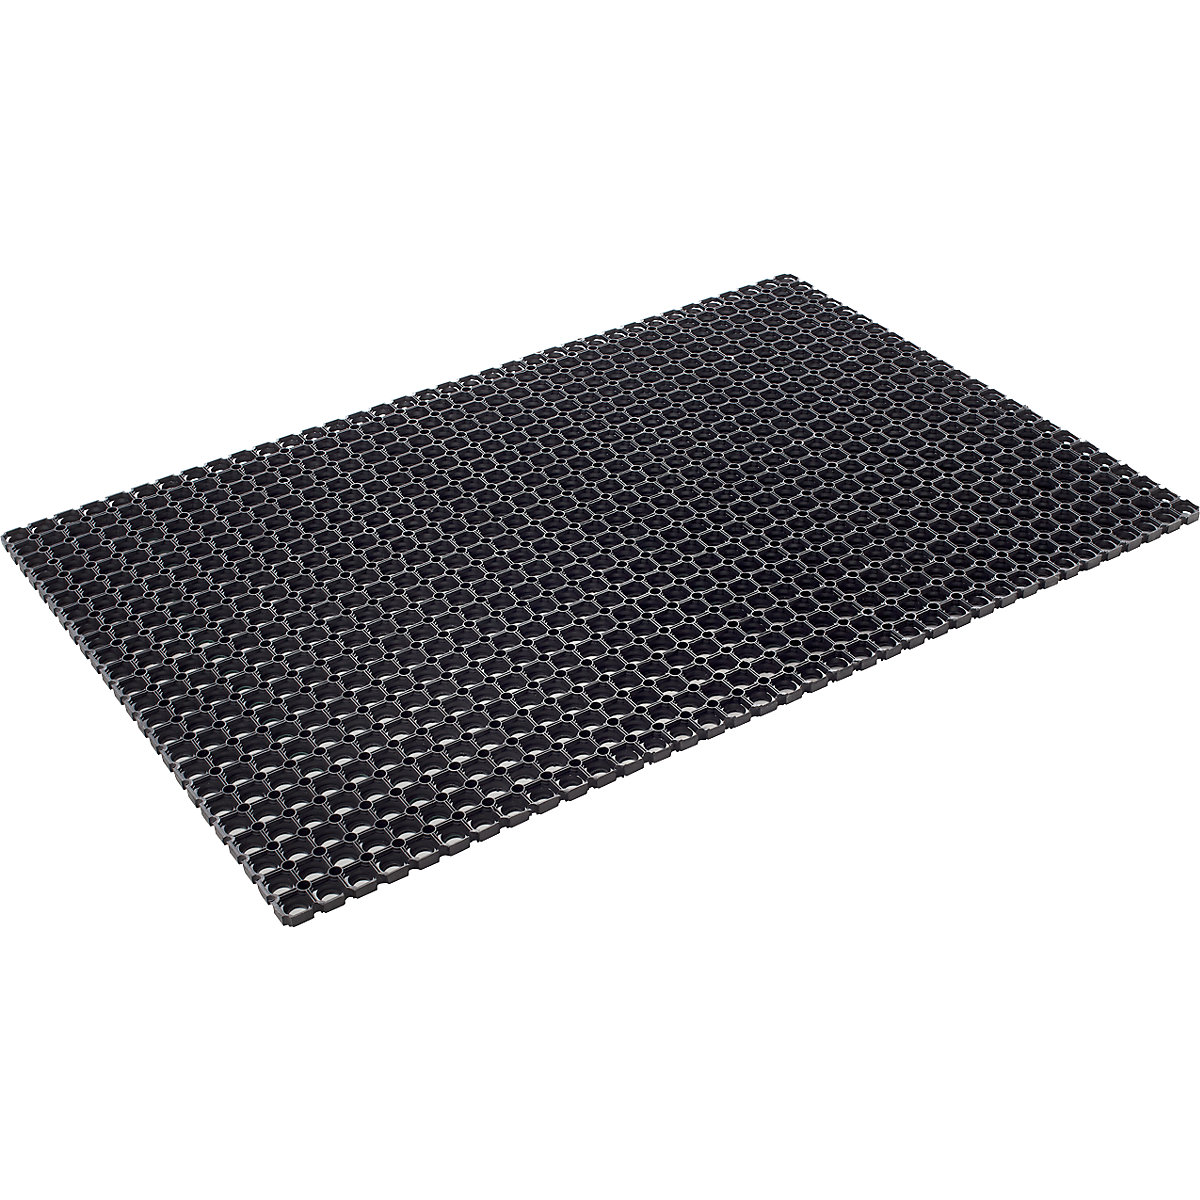 EAZYCARE SCRUB rubber ring matting, mat height 22 mm, LxW 1500 x 1000 mm, pack of 1